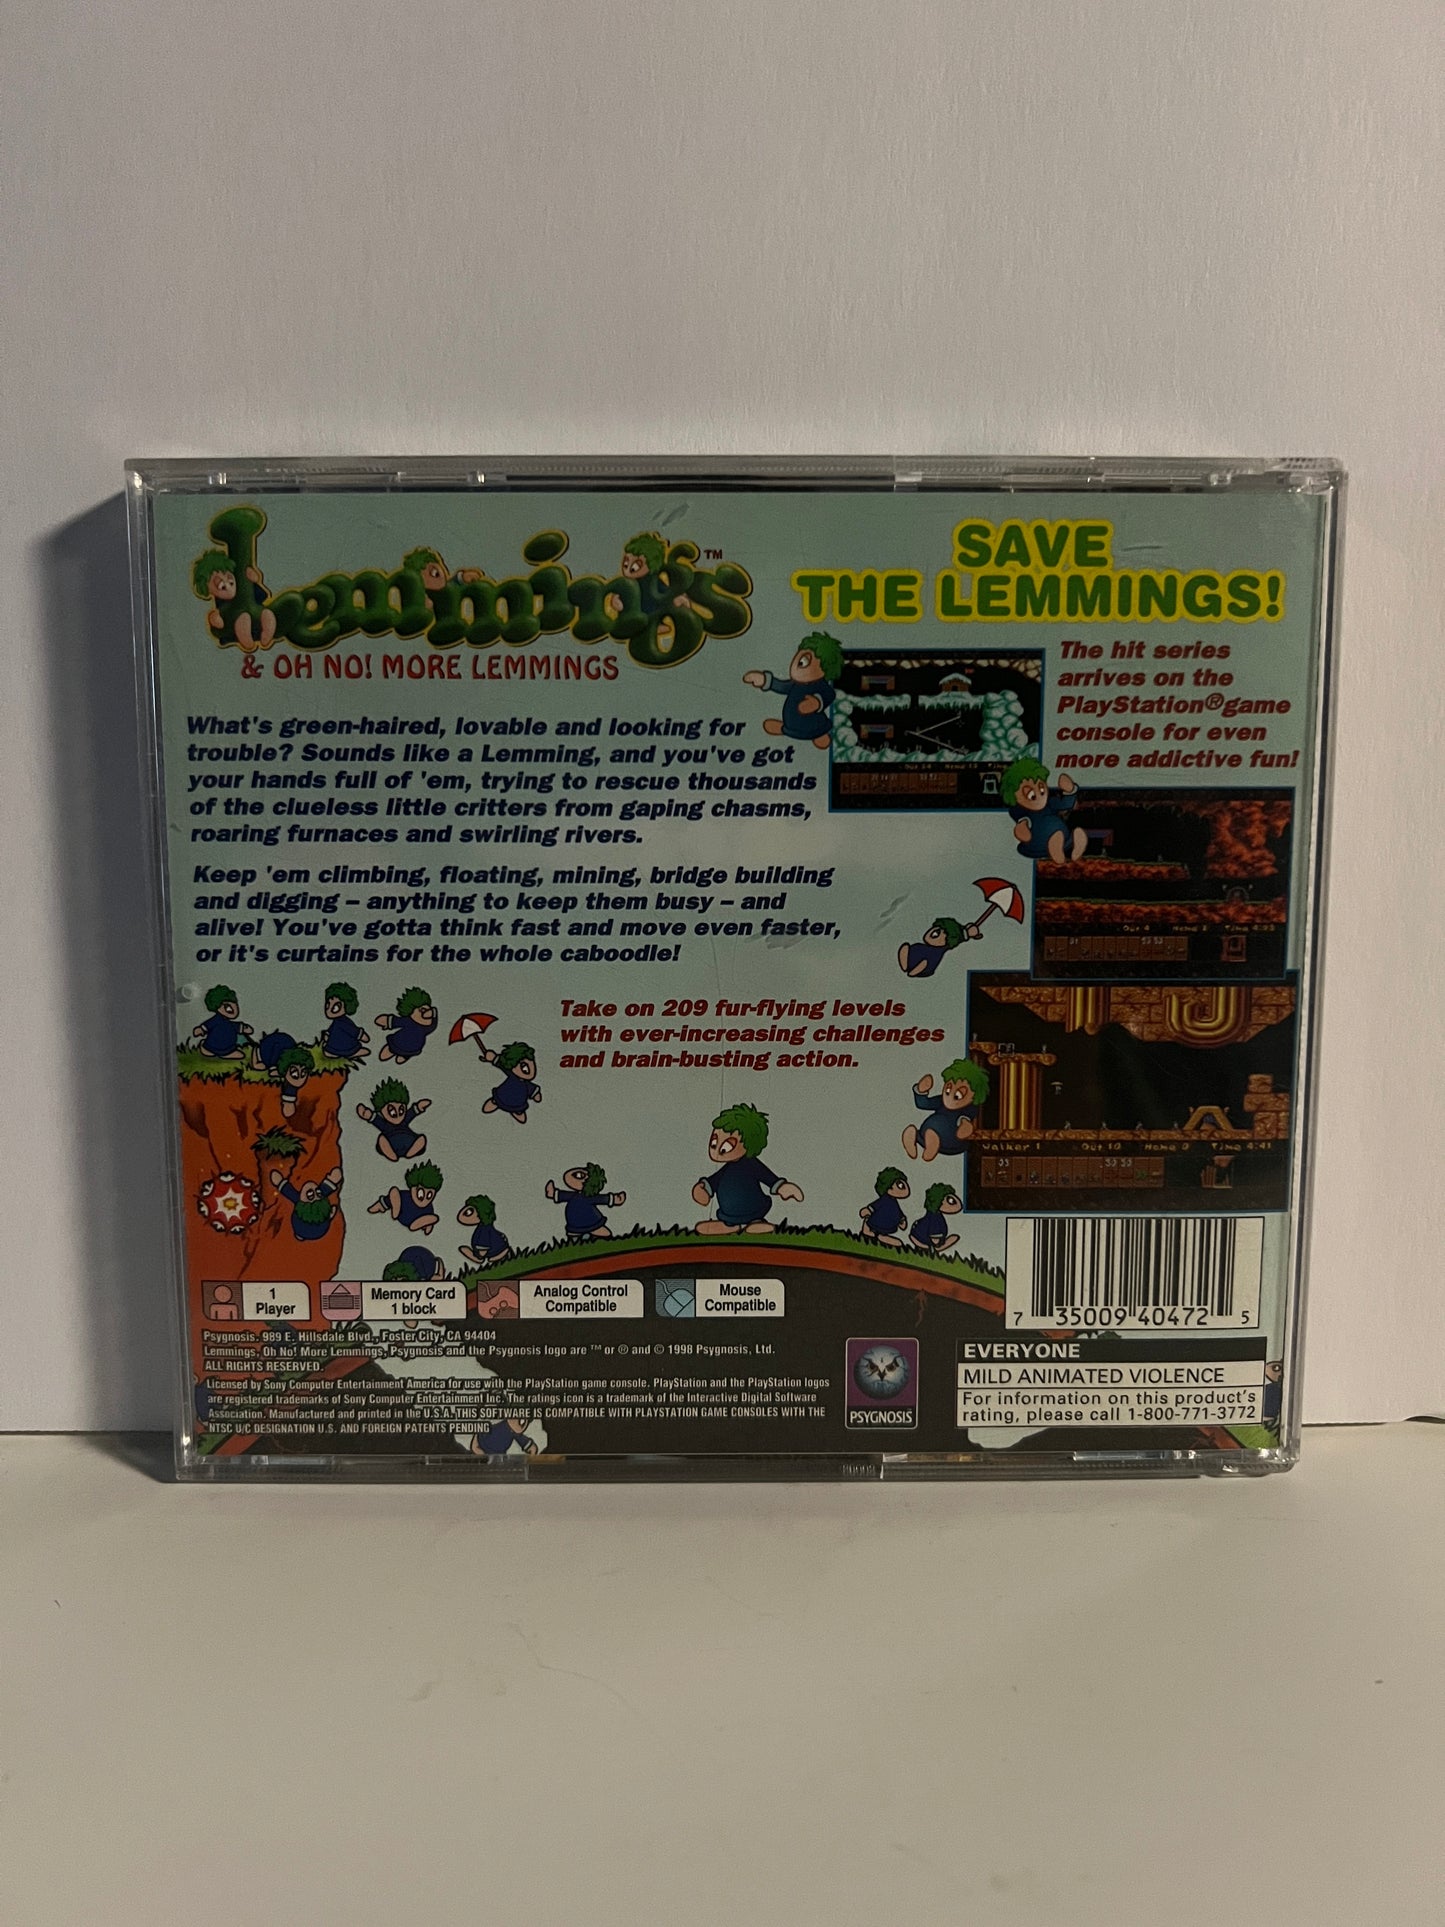 Lemmings & Oh No! More Lemmings - PS1 Game - Used